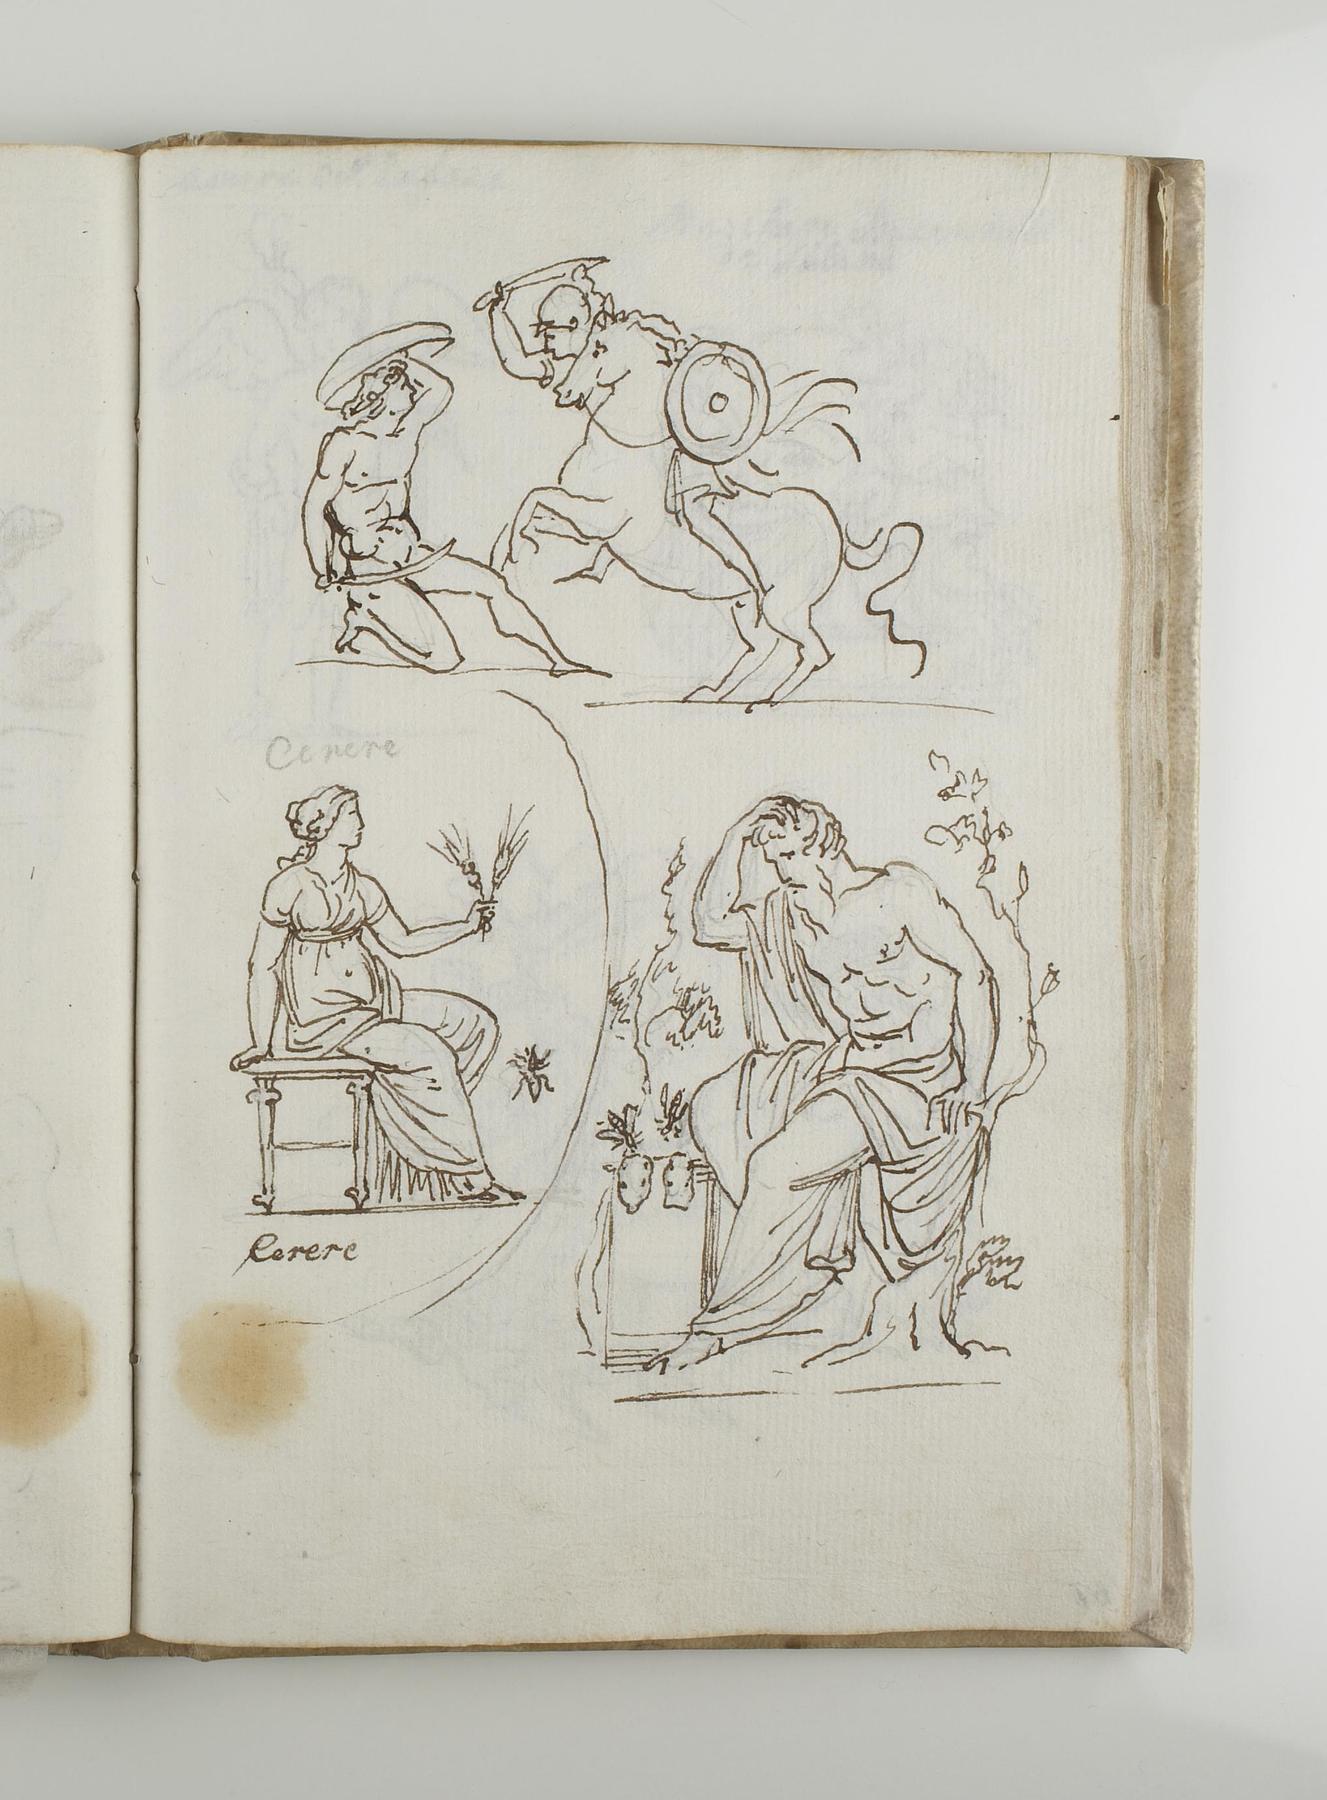 Rider and warrior fighting. Ceres. Philosopher seated, C563,24v